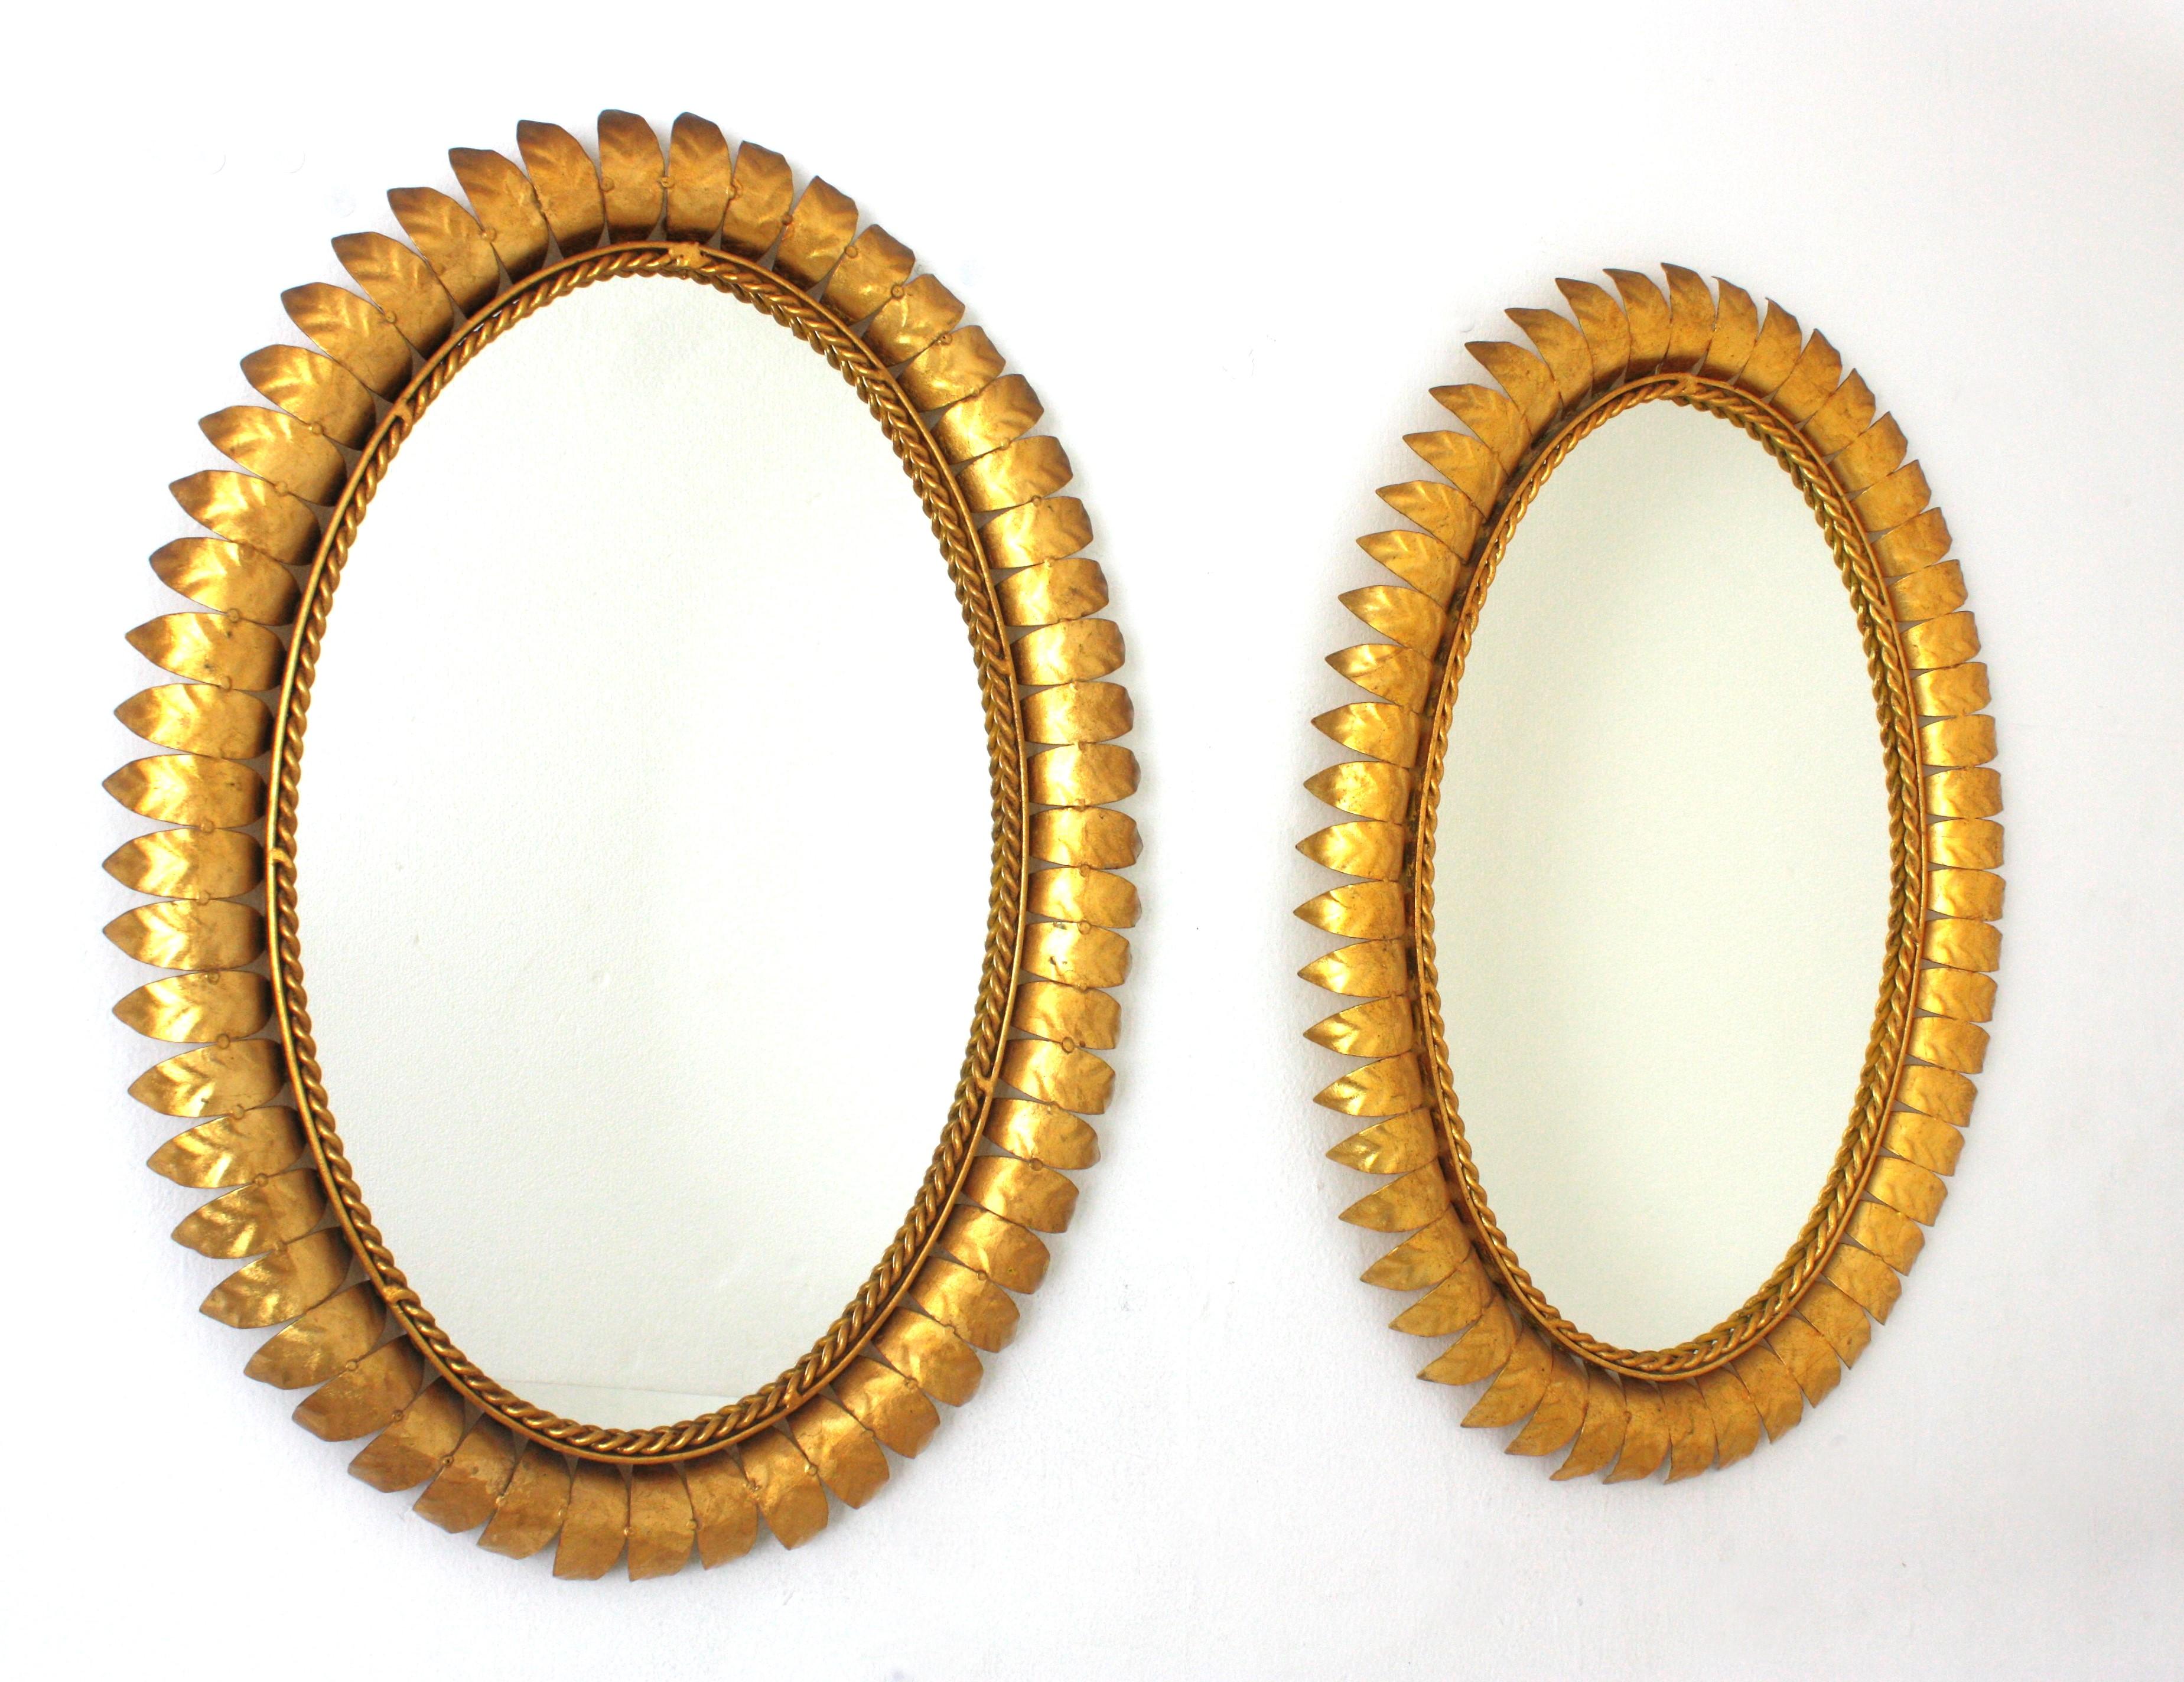 Gilt Iron Oval Sunburst Mirrors, Pair
Pair of Mid-Century Modern iron sunburst oval wall mirrors with leafed frames and gold leaf finish, Spain, 1950s.
These highly decorative leafed sunburst mirrors have a nice patina showing their original gold